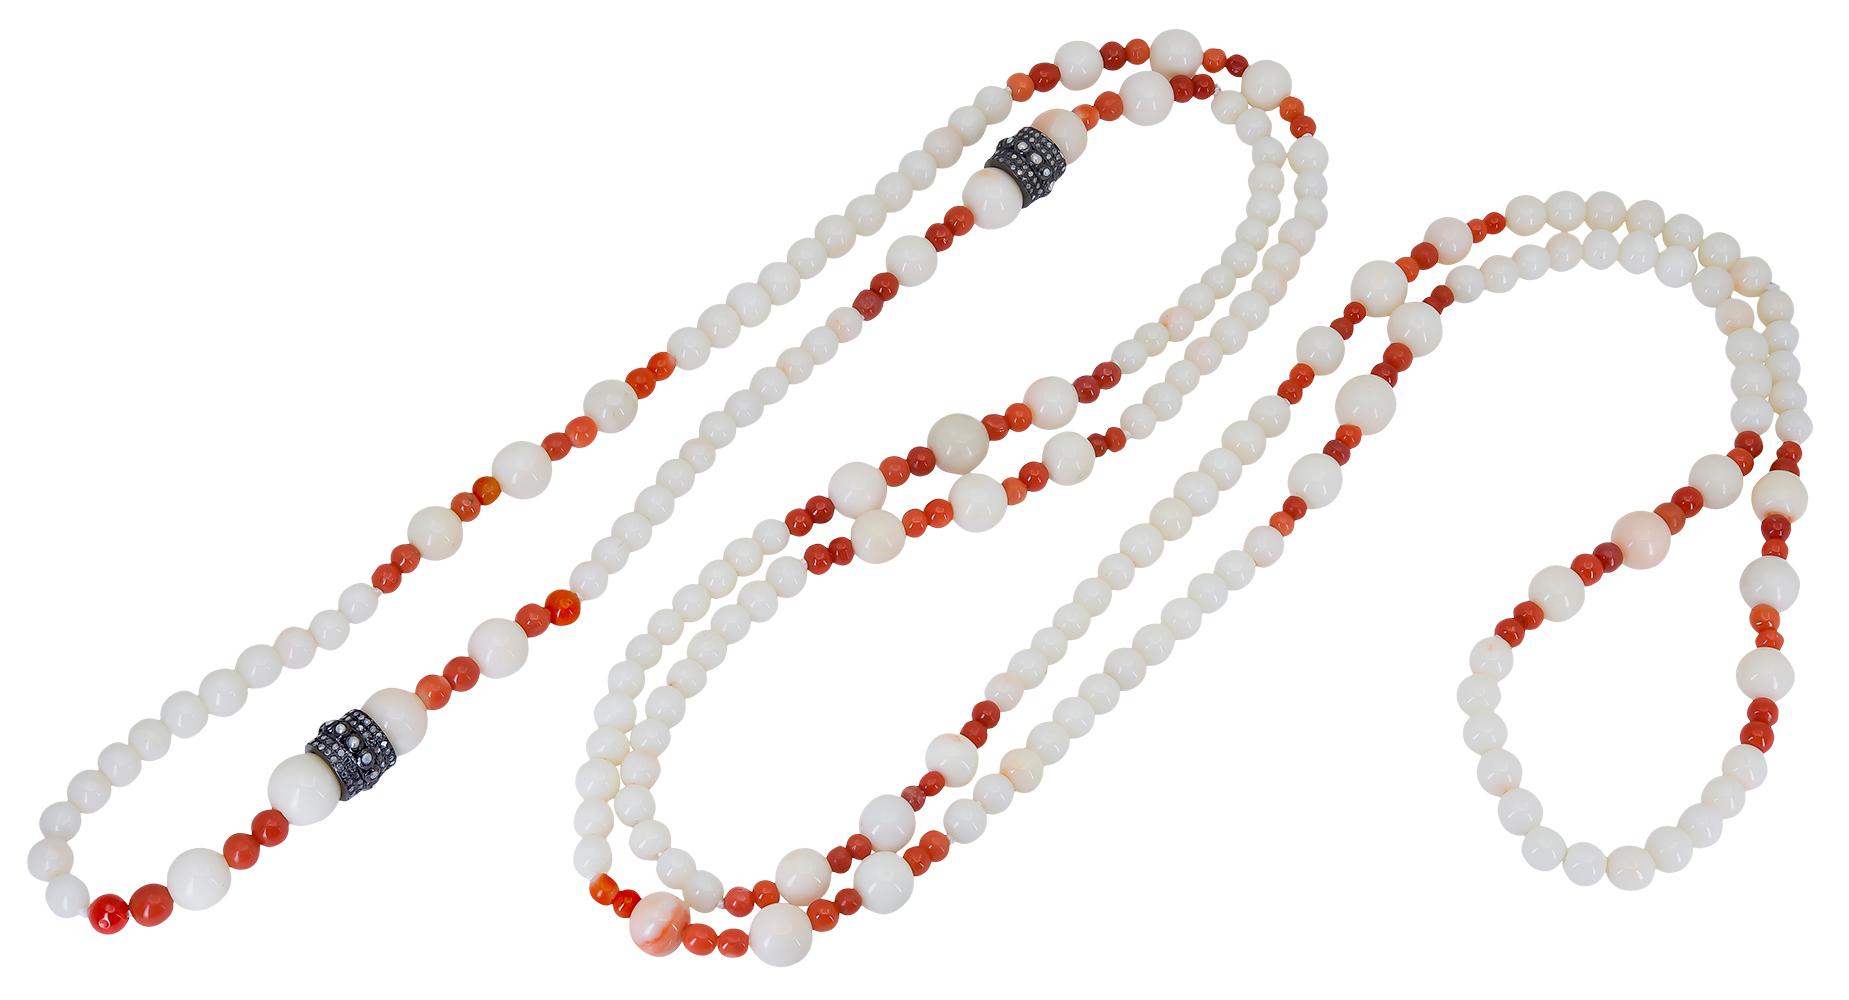 These White and Red Coral beads were purchased as part of an estate before being made into this beautiful 30 inch necklace that consists of round white 5.5 - 9.0 mm coral beads and vivid 4 mm red coral beads that create a stunning contrast that is